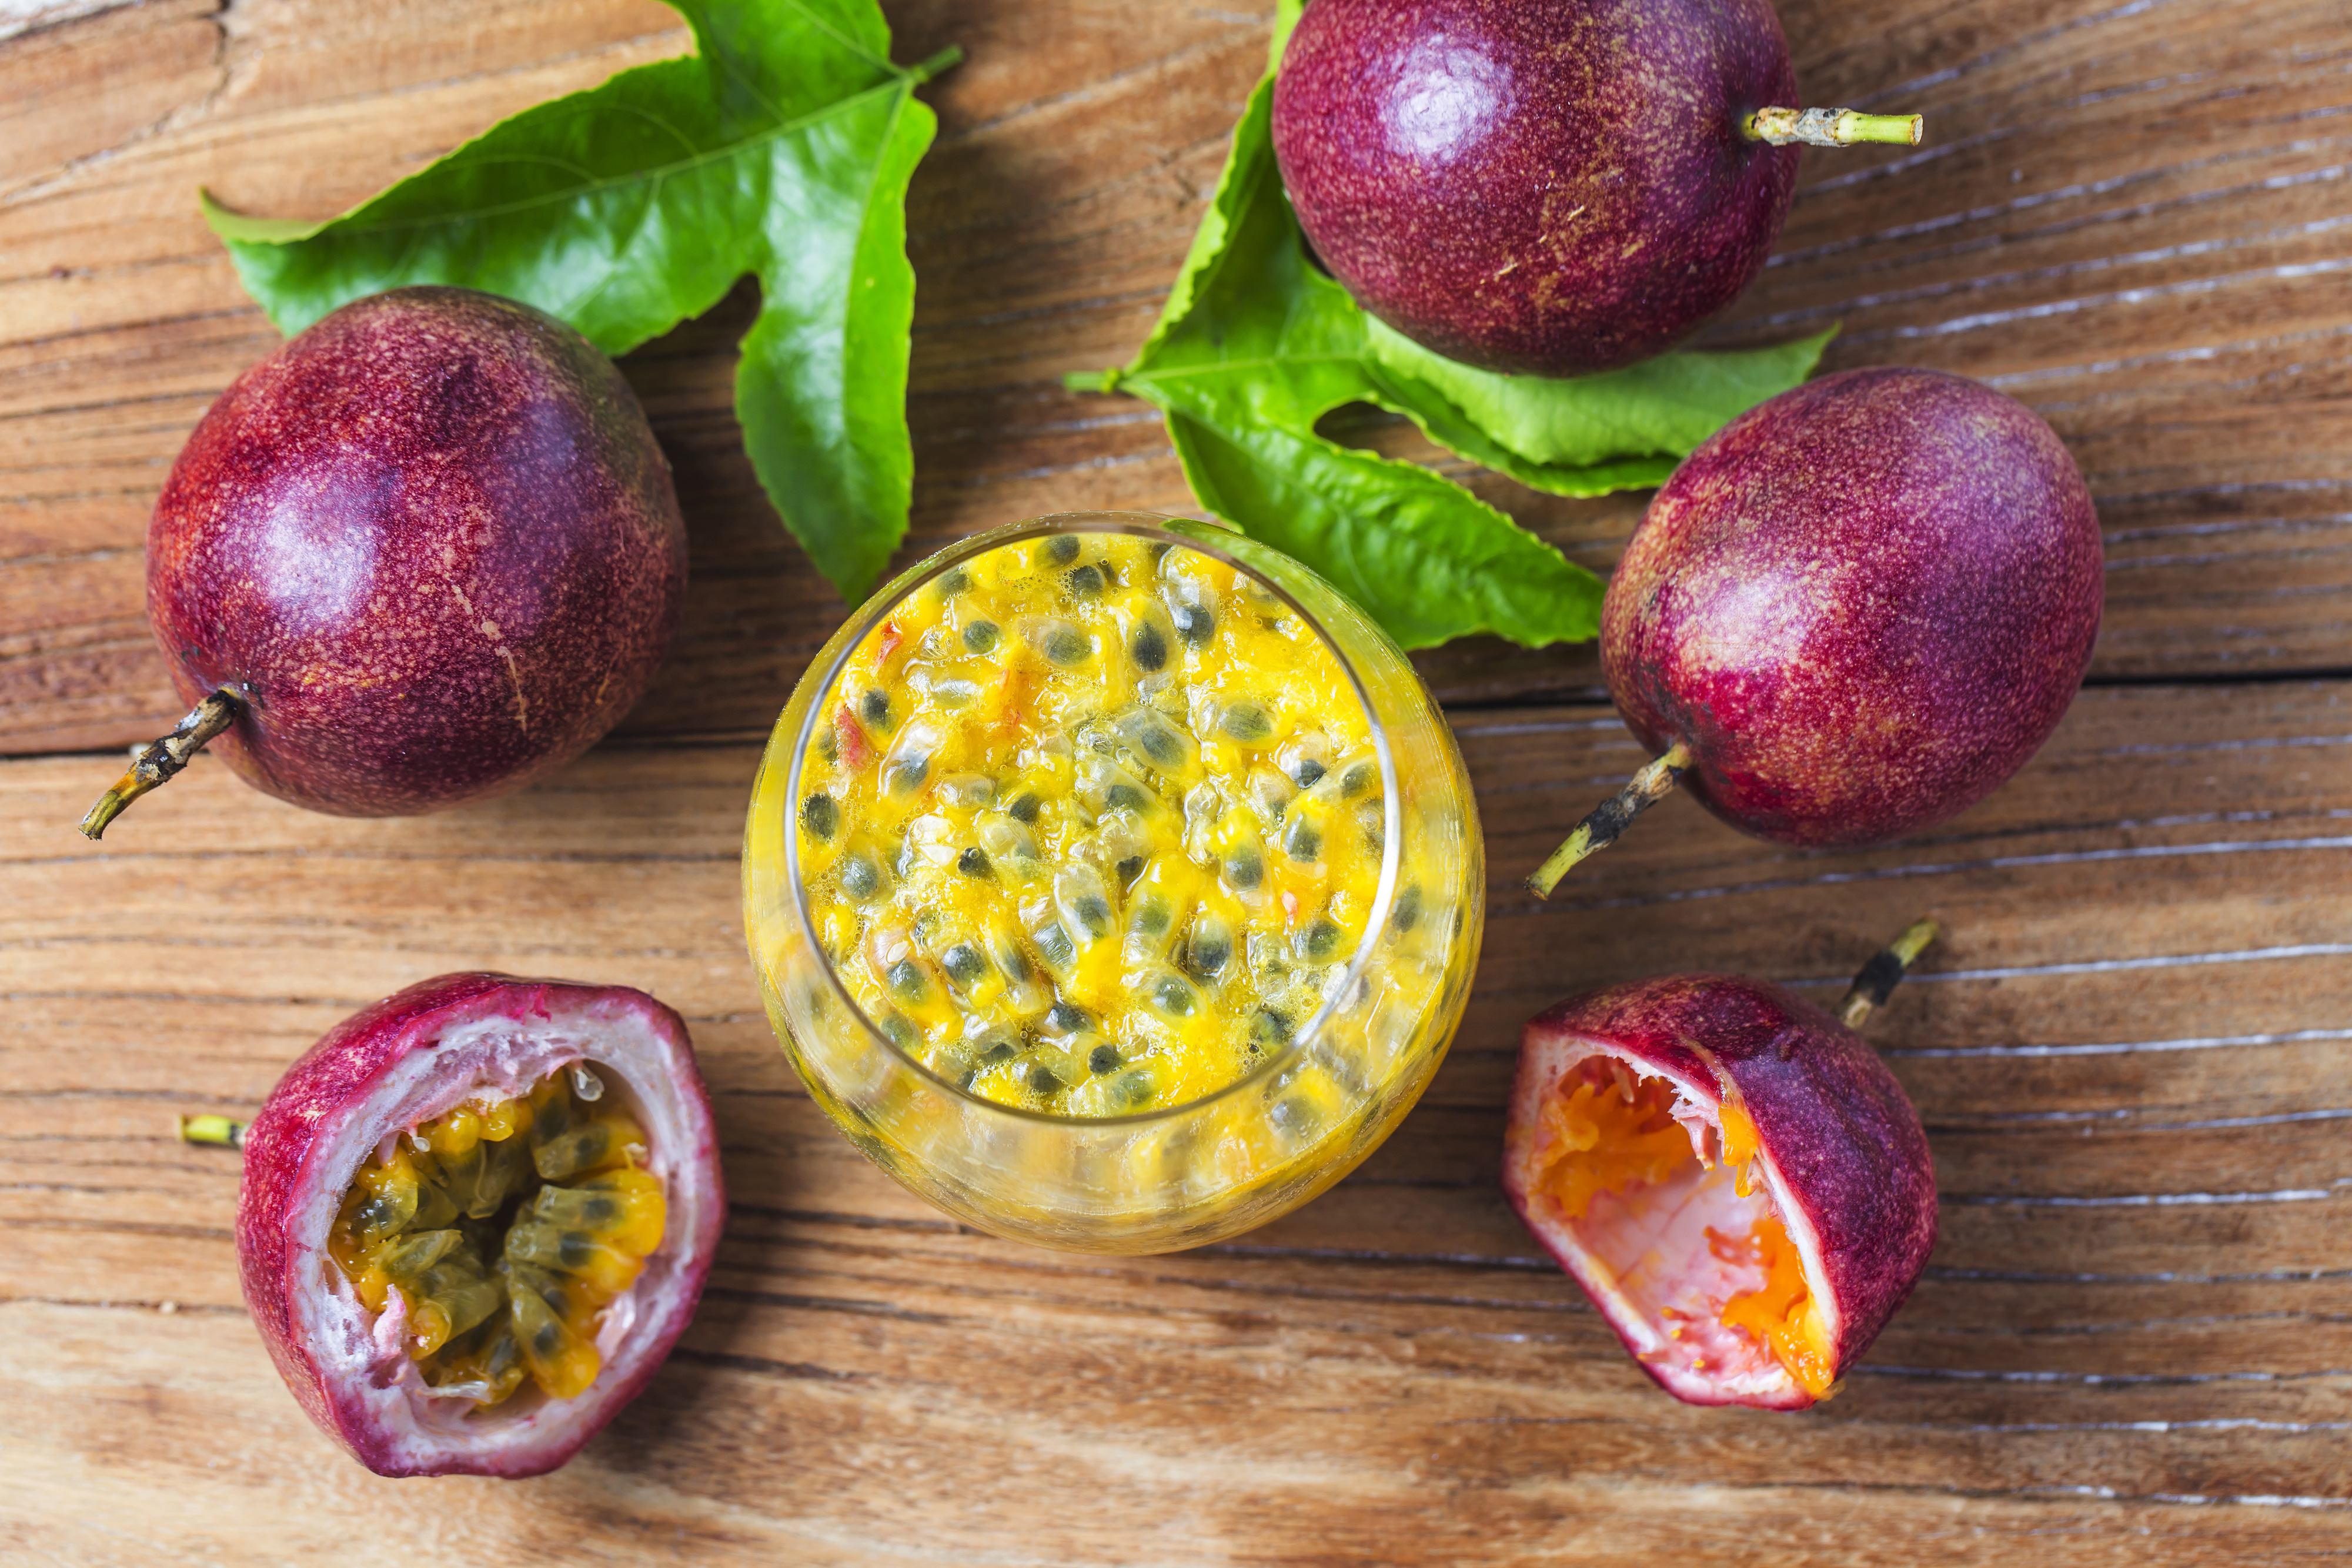 mango-with-passion-fruit-smoothie-by-fresh-ingredients.jpg